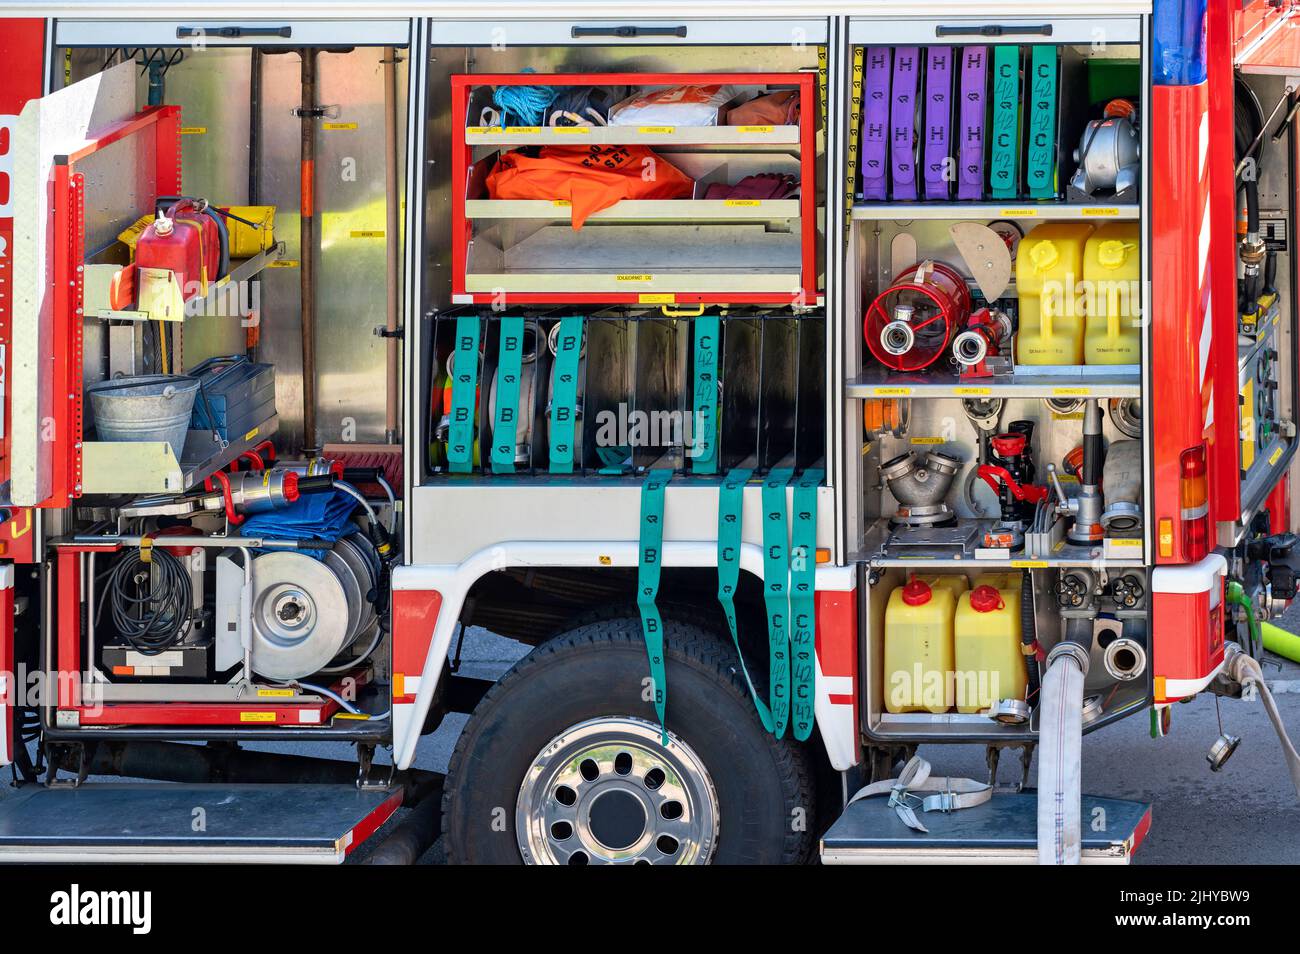 equipment of a fire extinguishing tanker of a fire department in Austria Stock Photo